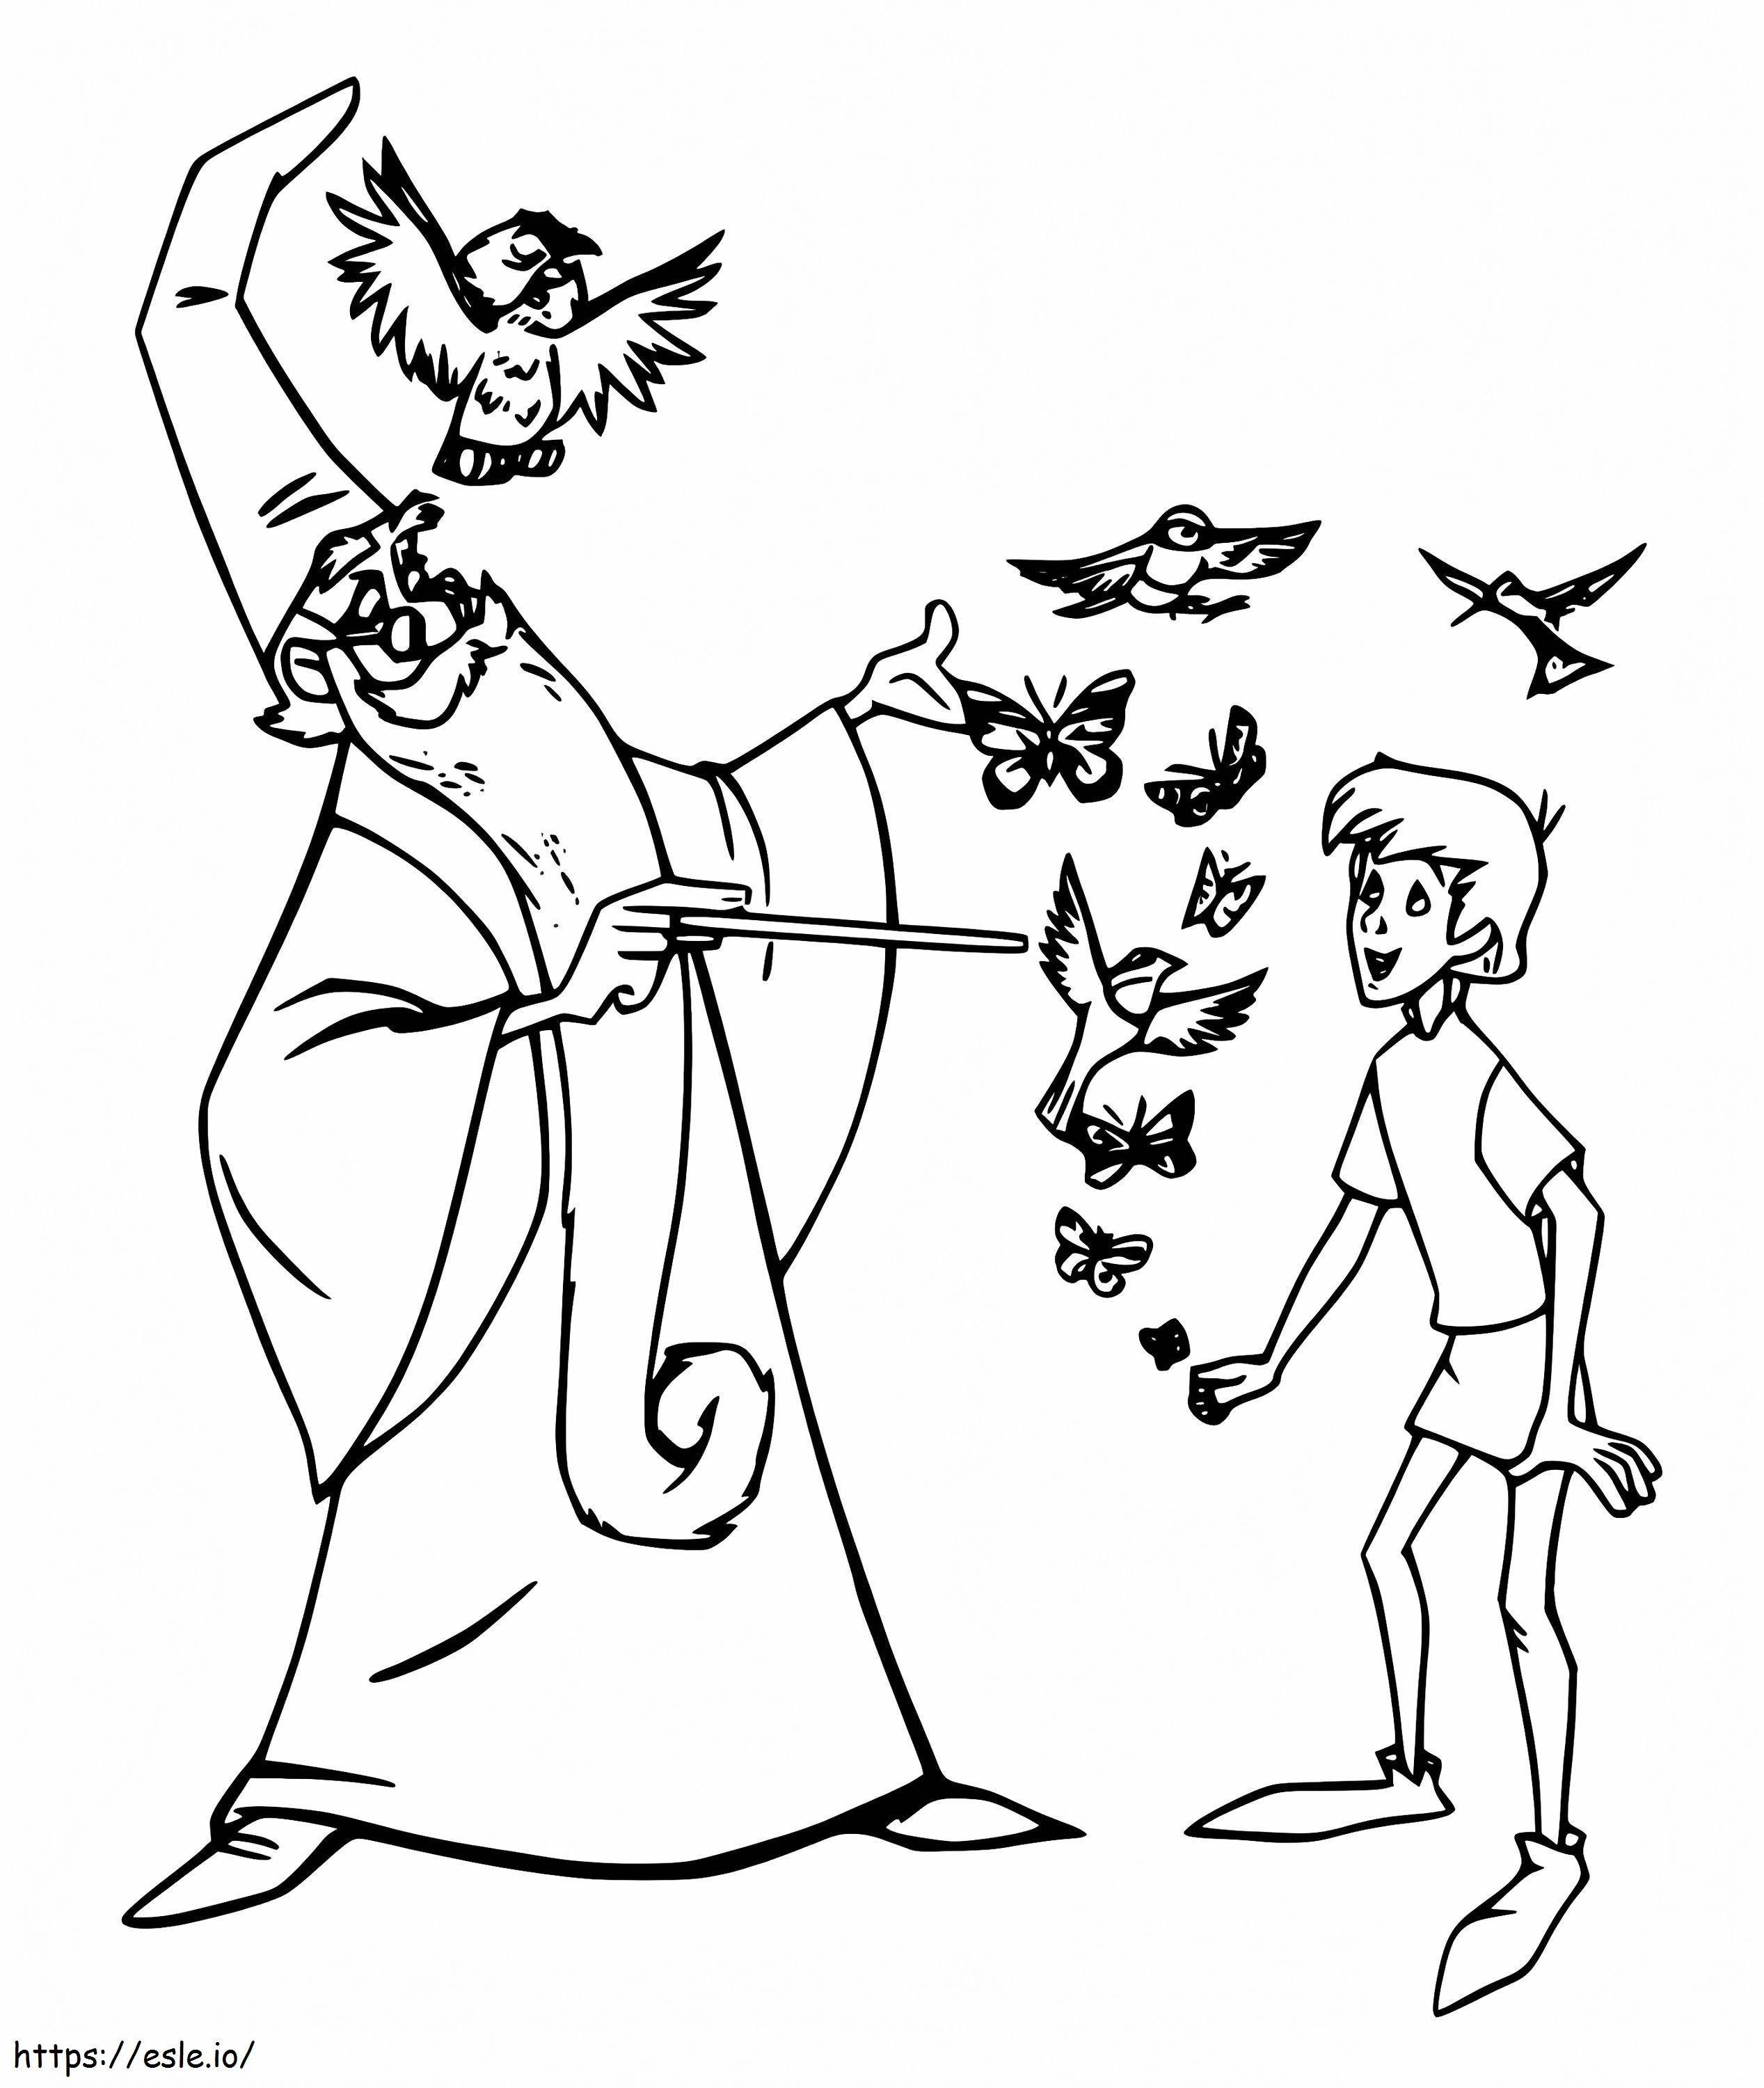 Merlin And Arthur Pendragon coloring page